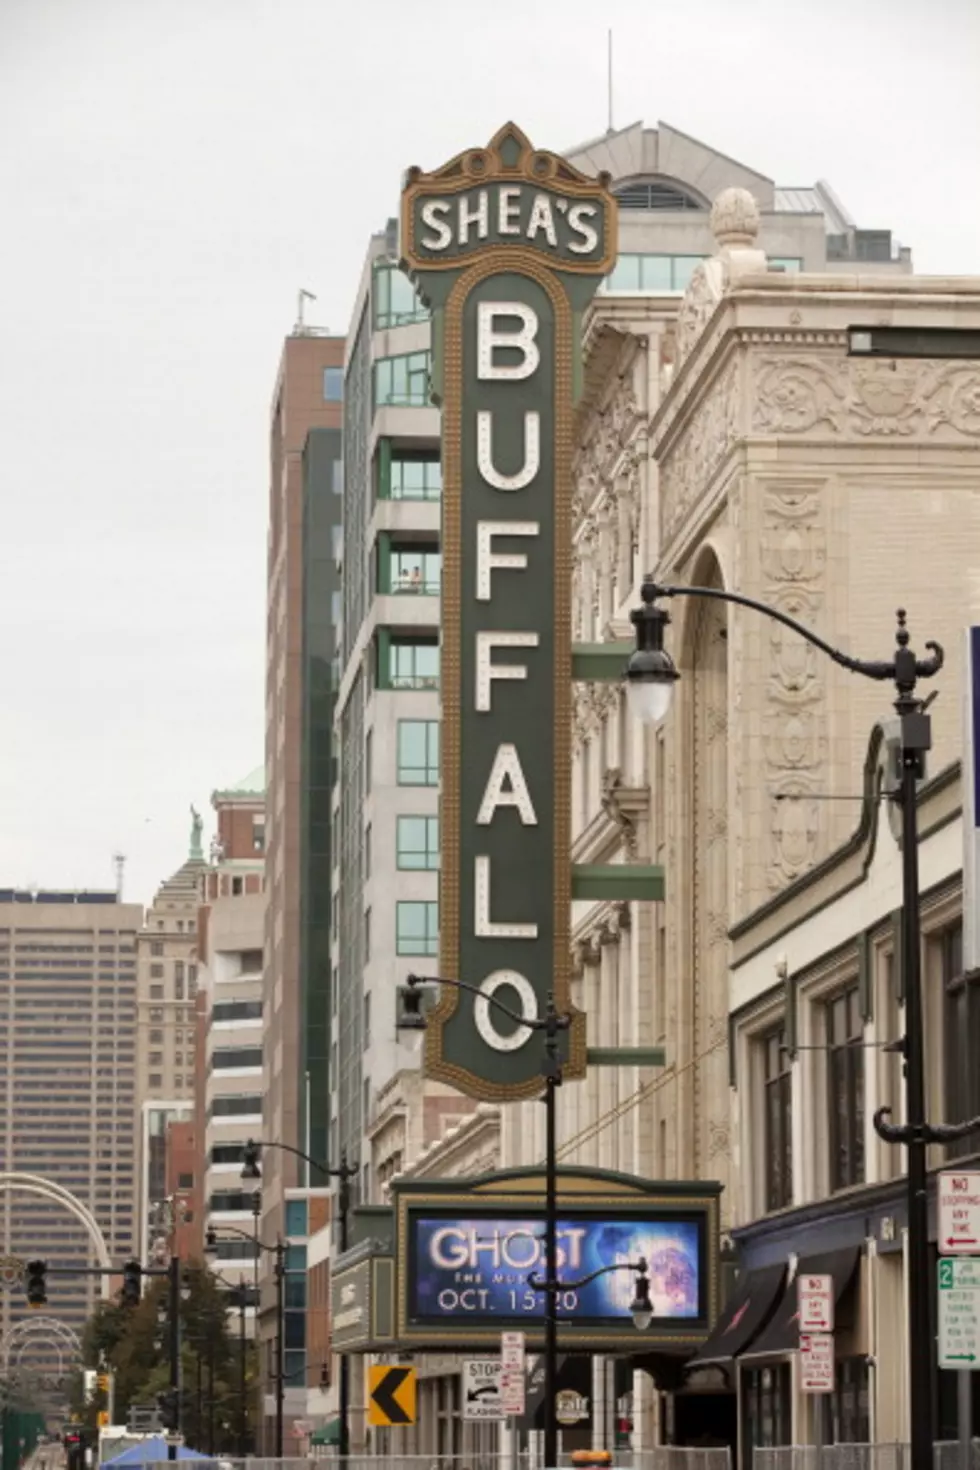 Hamilton is coming to Buffalo find out how to get tickets